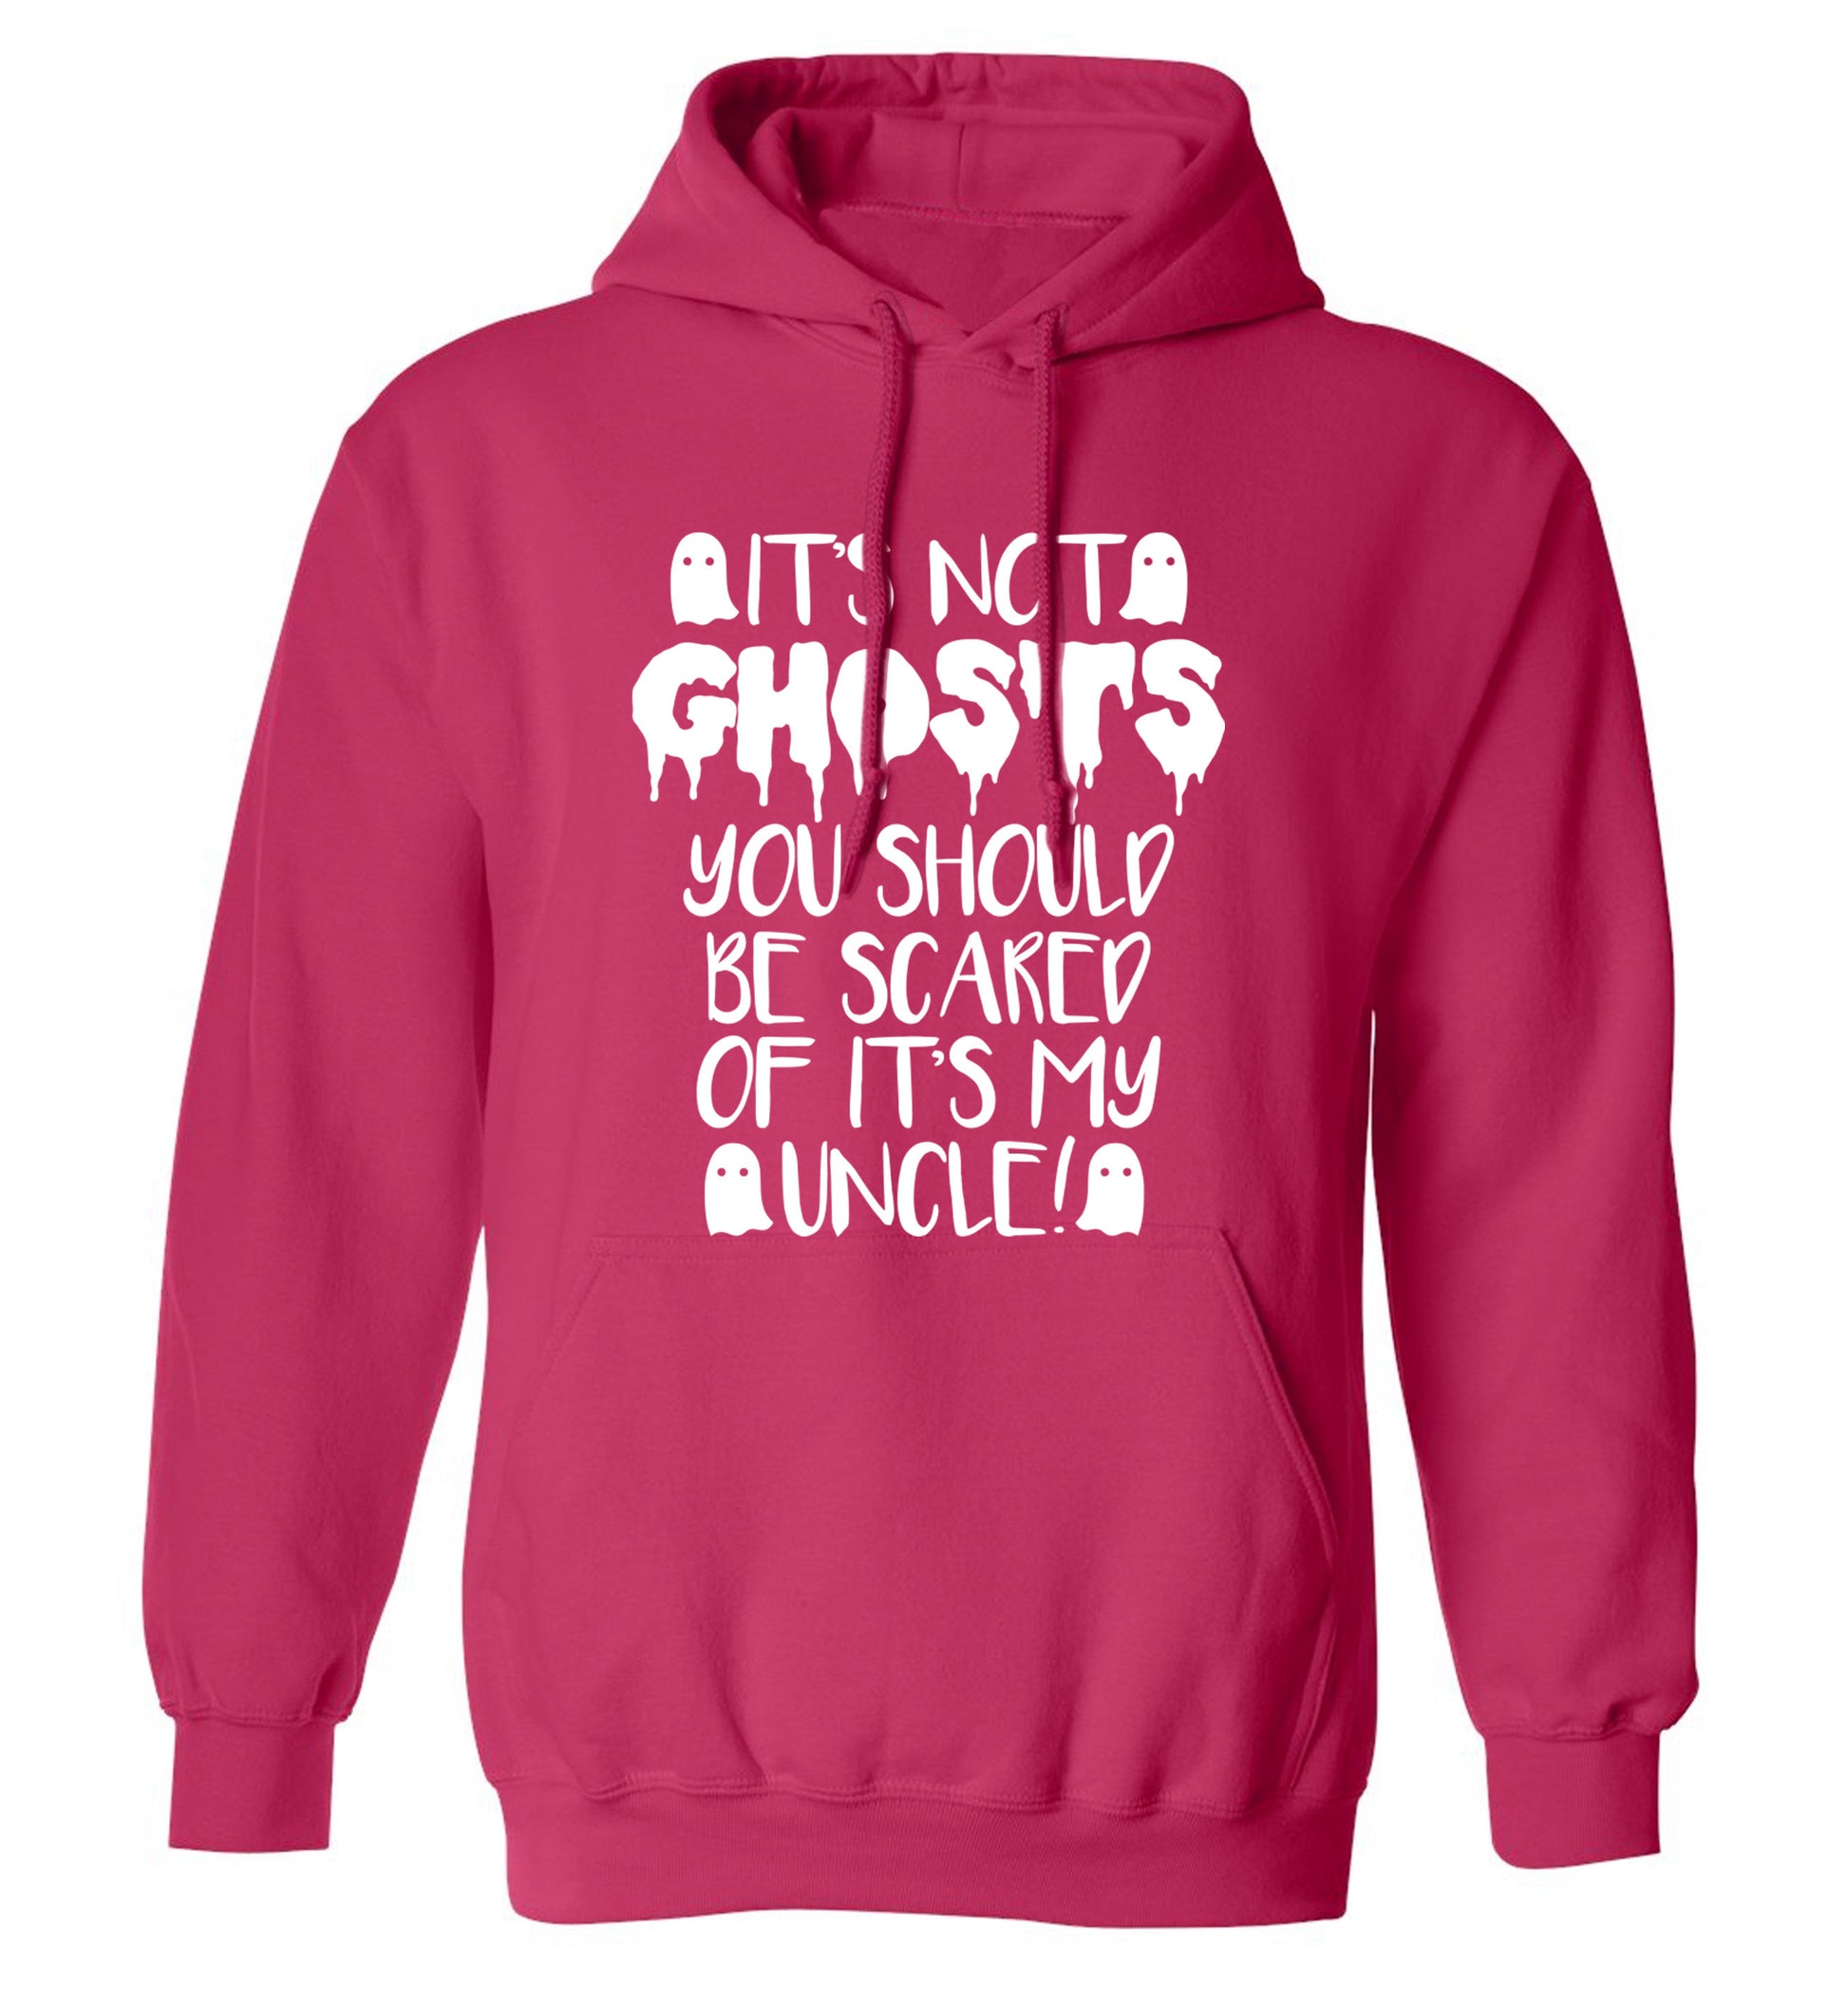 It's not ghosts you should be scared of it's my uncle! adults unisex pink hoodie 2XL